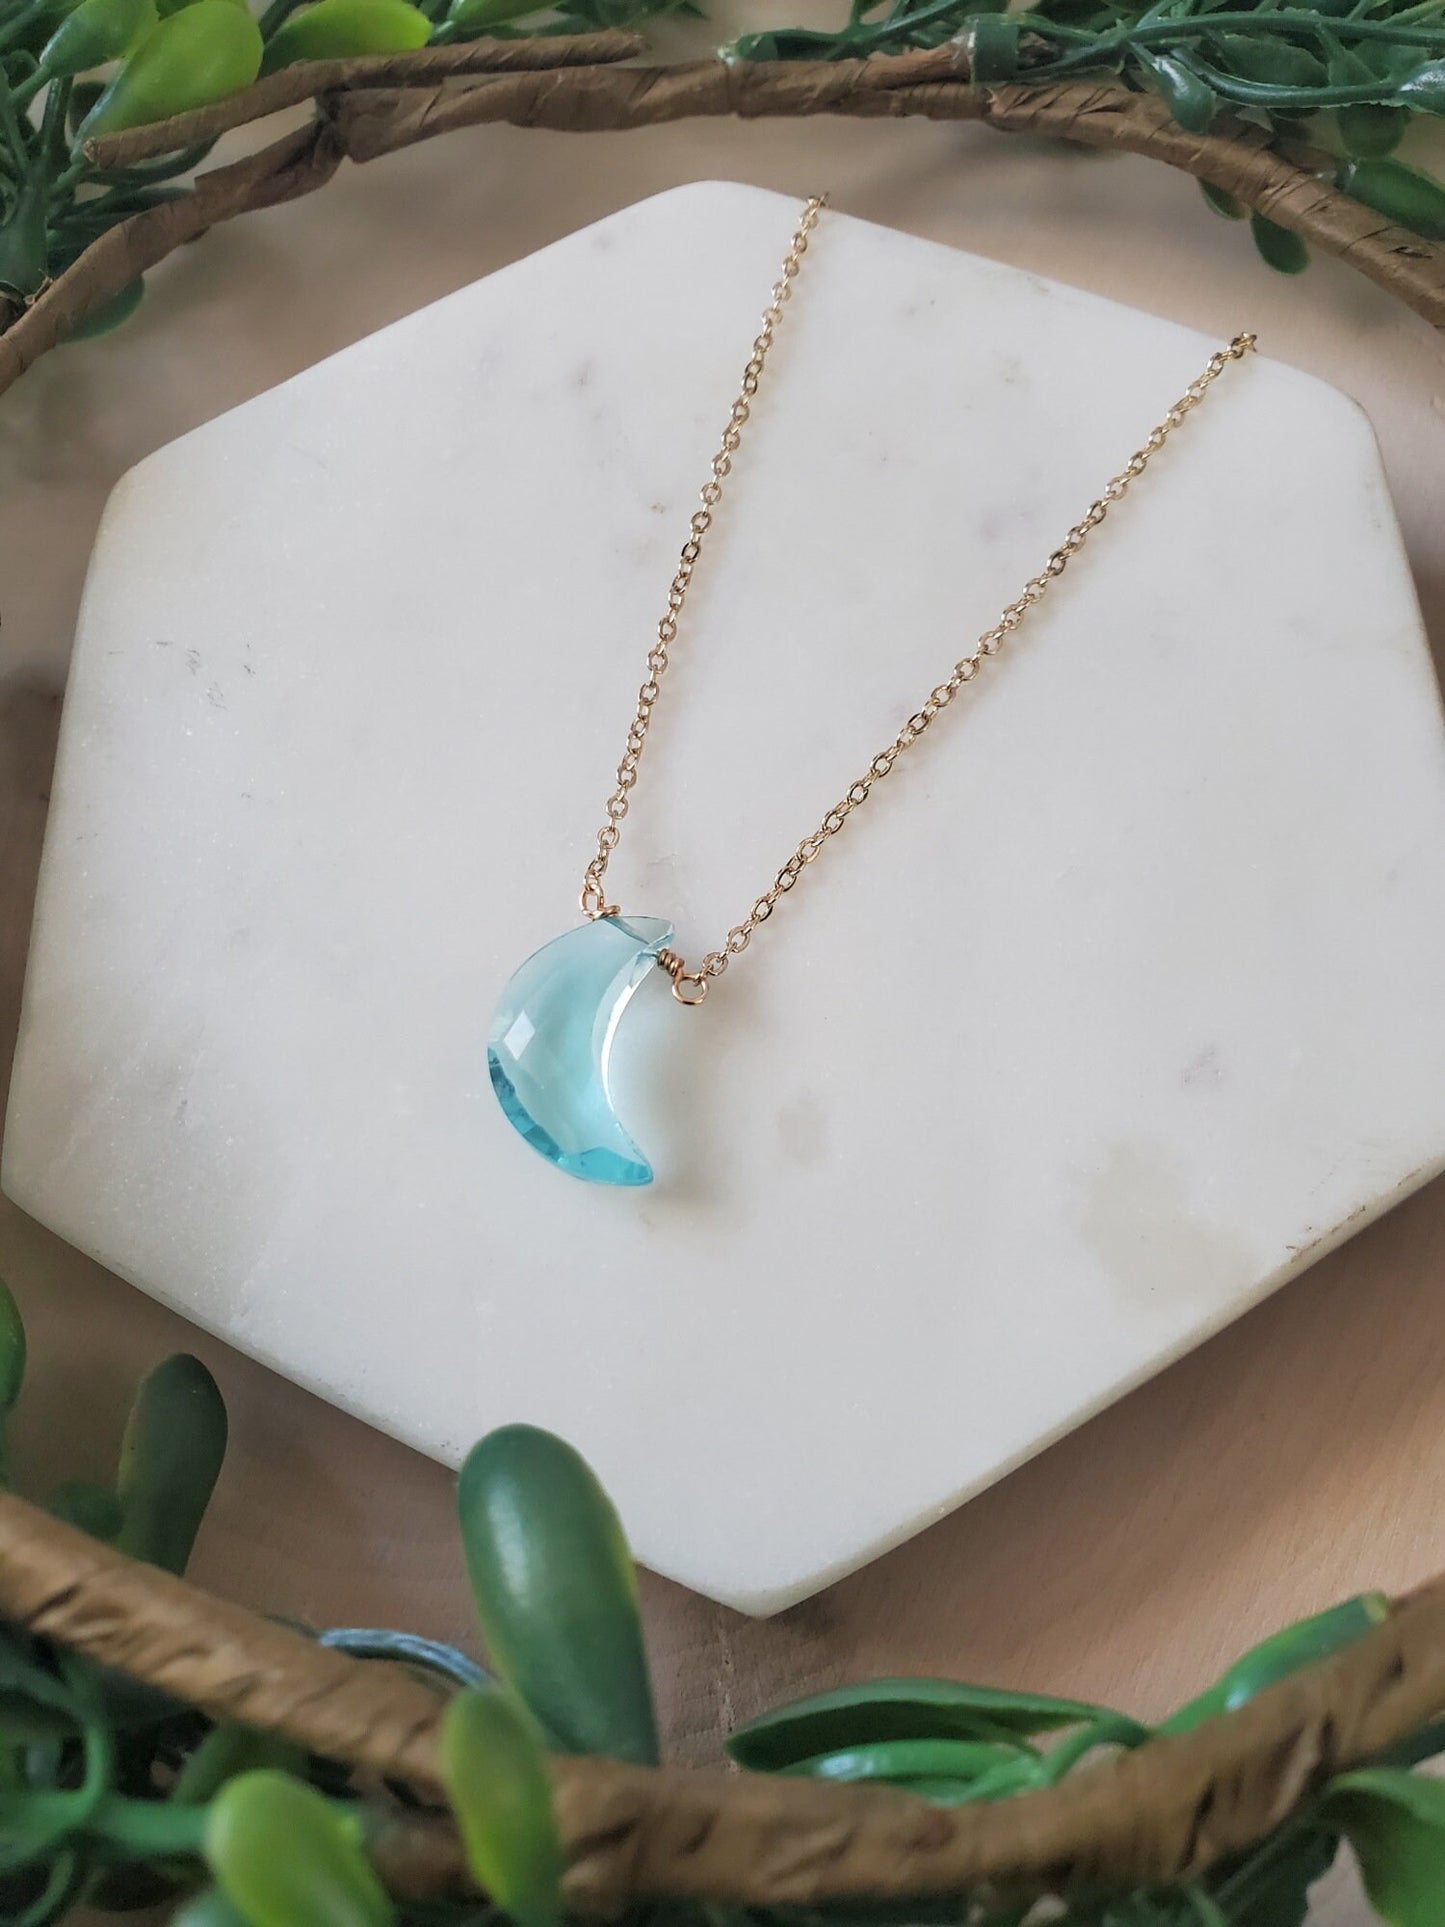 Once In A Blue Moon Necklace in Gold